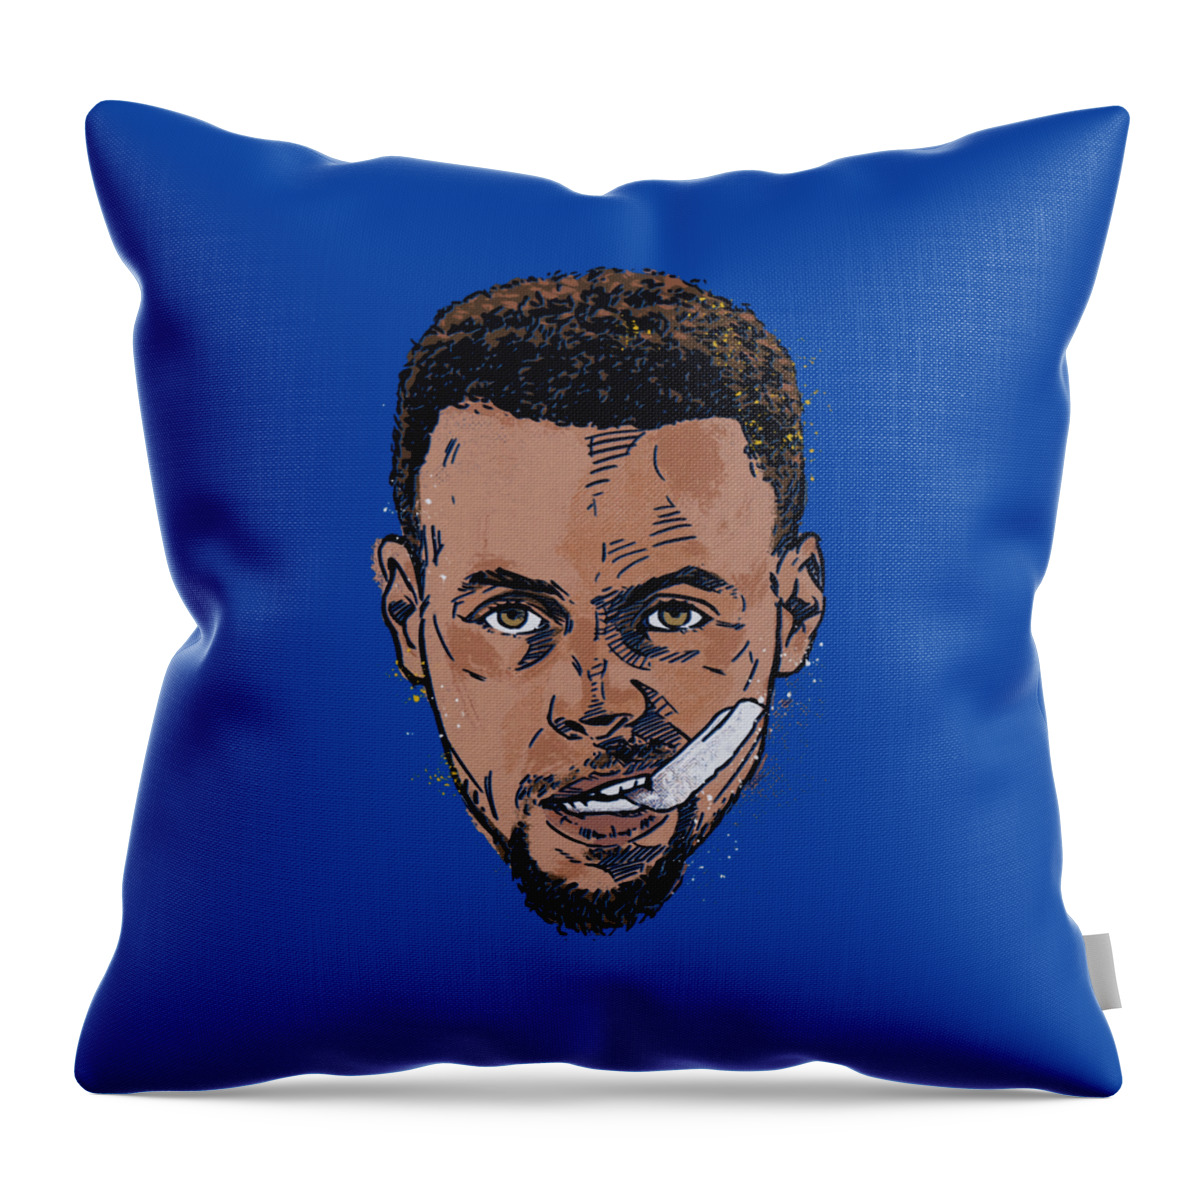 Steph Curry Mouthguard Throw Pillow featuring the digital art Steph Curry Mouthguard by Kelvin Kent